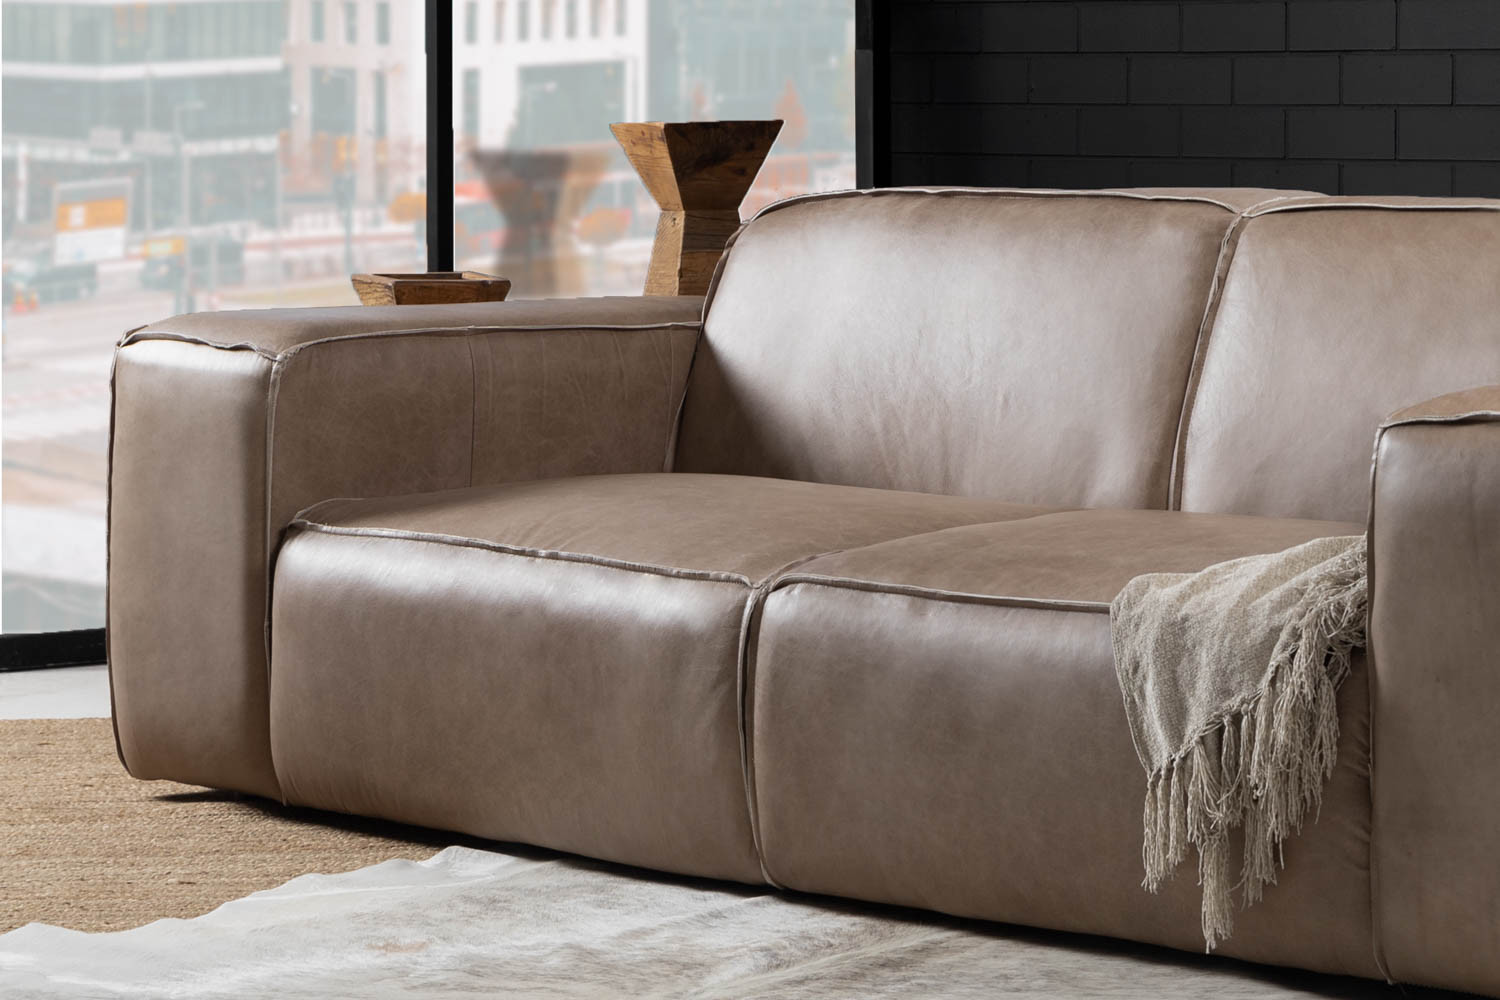 Jagger 2 Seater Leather Couch - Smoke